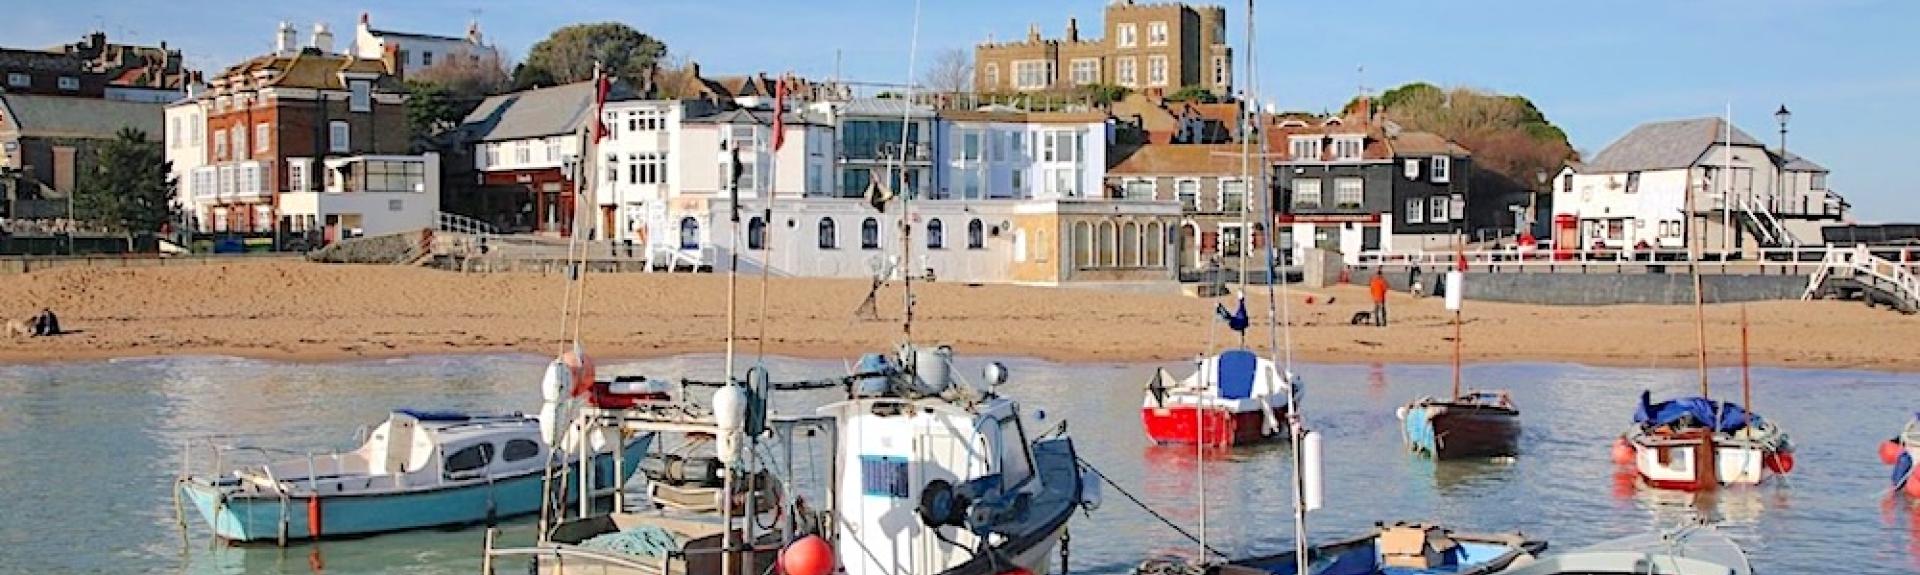 Yachts and small fishing boats anchored in Broadstairs harbour at high tide